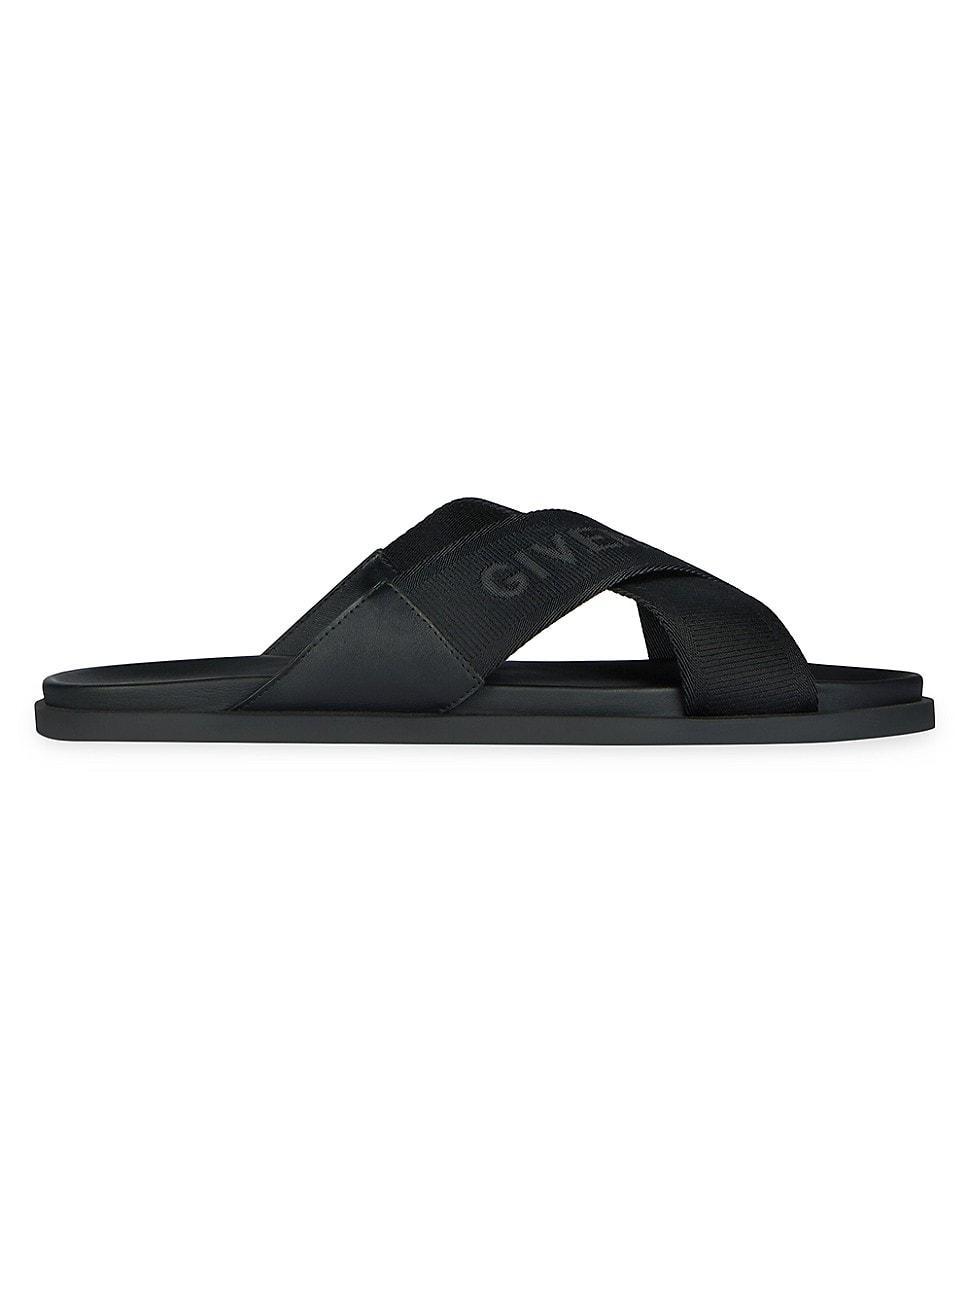 Mens G Plage Flat Sandals with Crossed Straps in Webbing Product Image